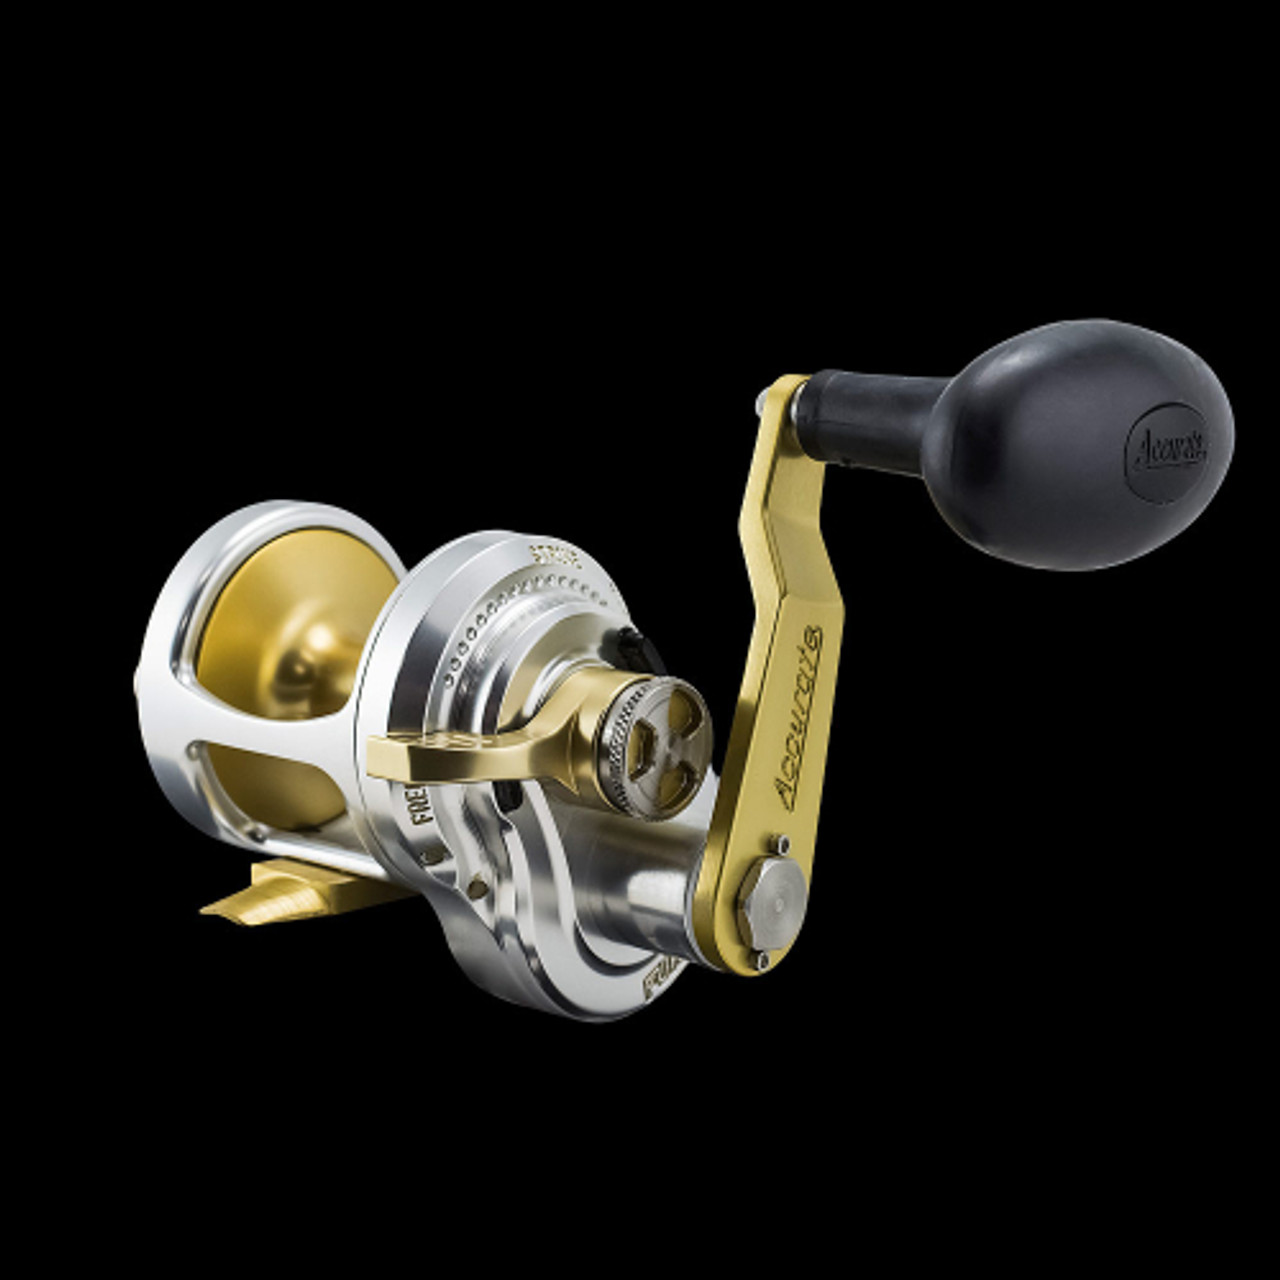 Accurate Fury Single Speed Reel FX-400 